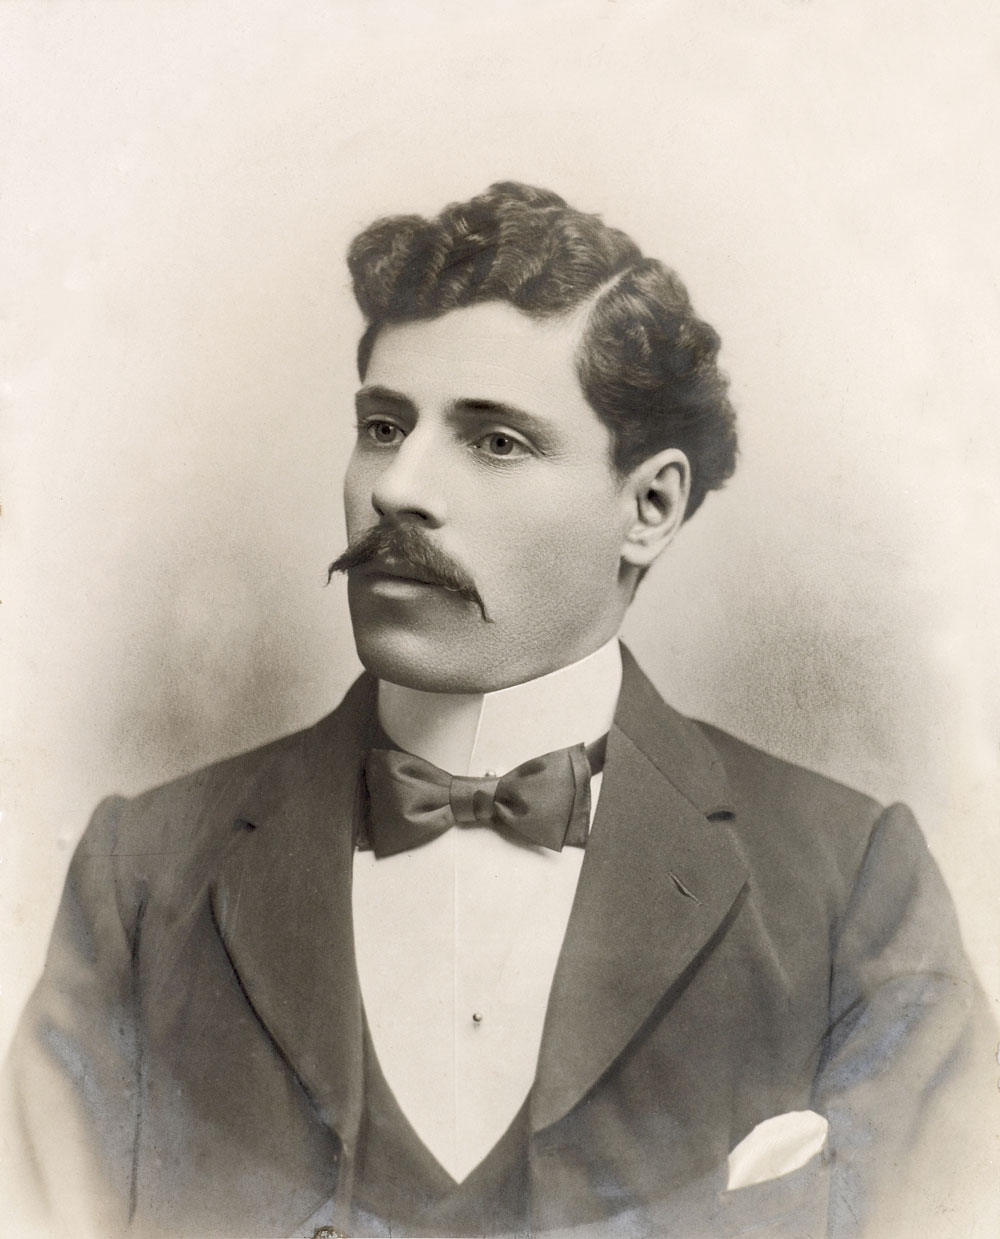 Image 3 of 6 - A formal portrait of Betro Abicare wearing a dark suit and bowtie taken around 1902